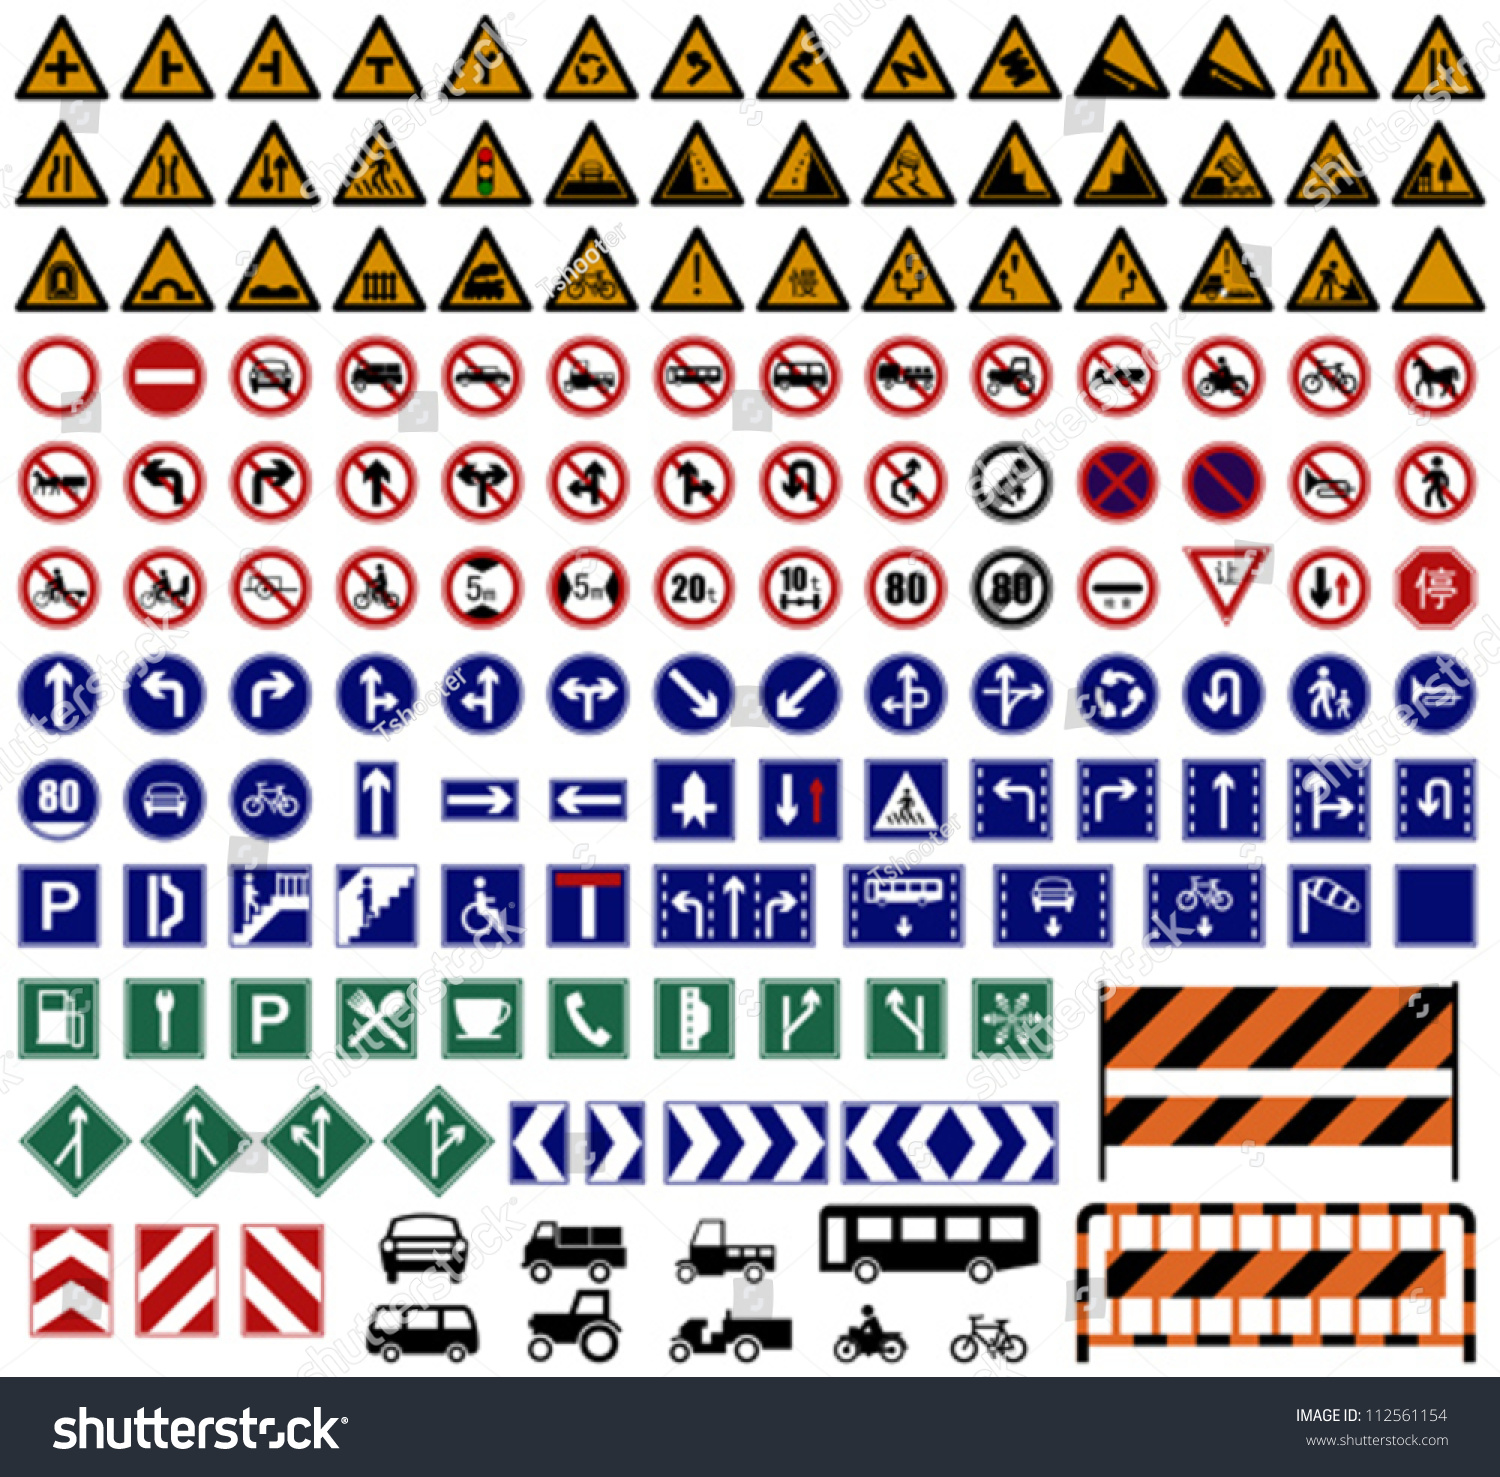 Layered editable vector illustration of Hundreds Traffic Sign Collections. #112561154